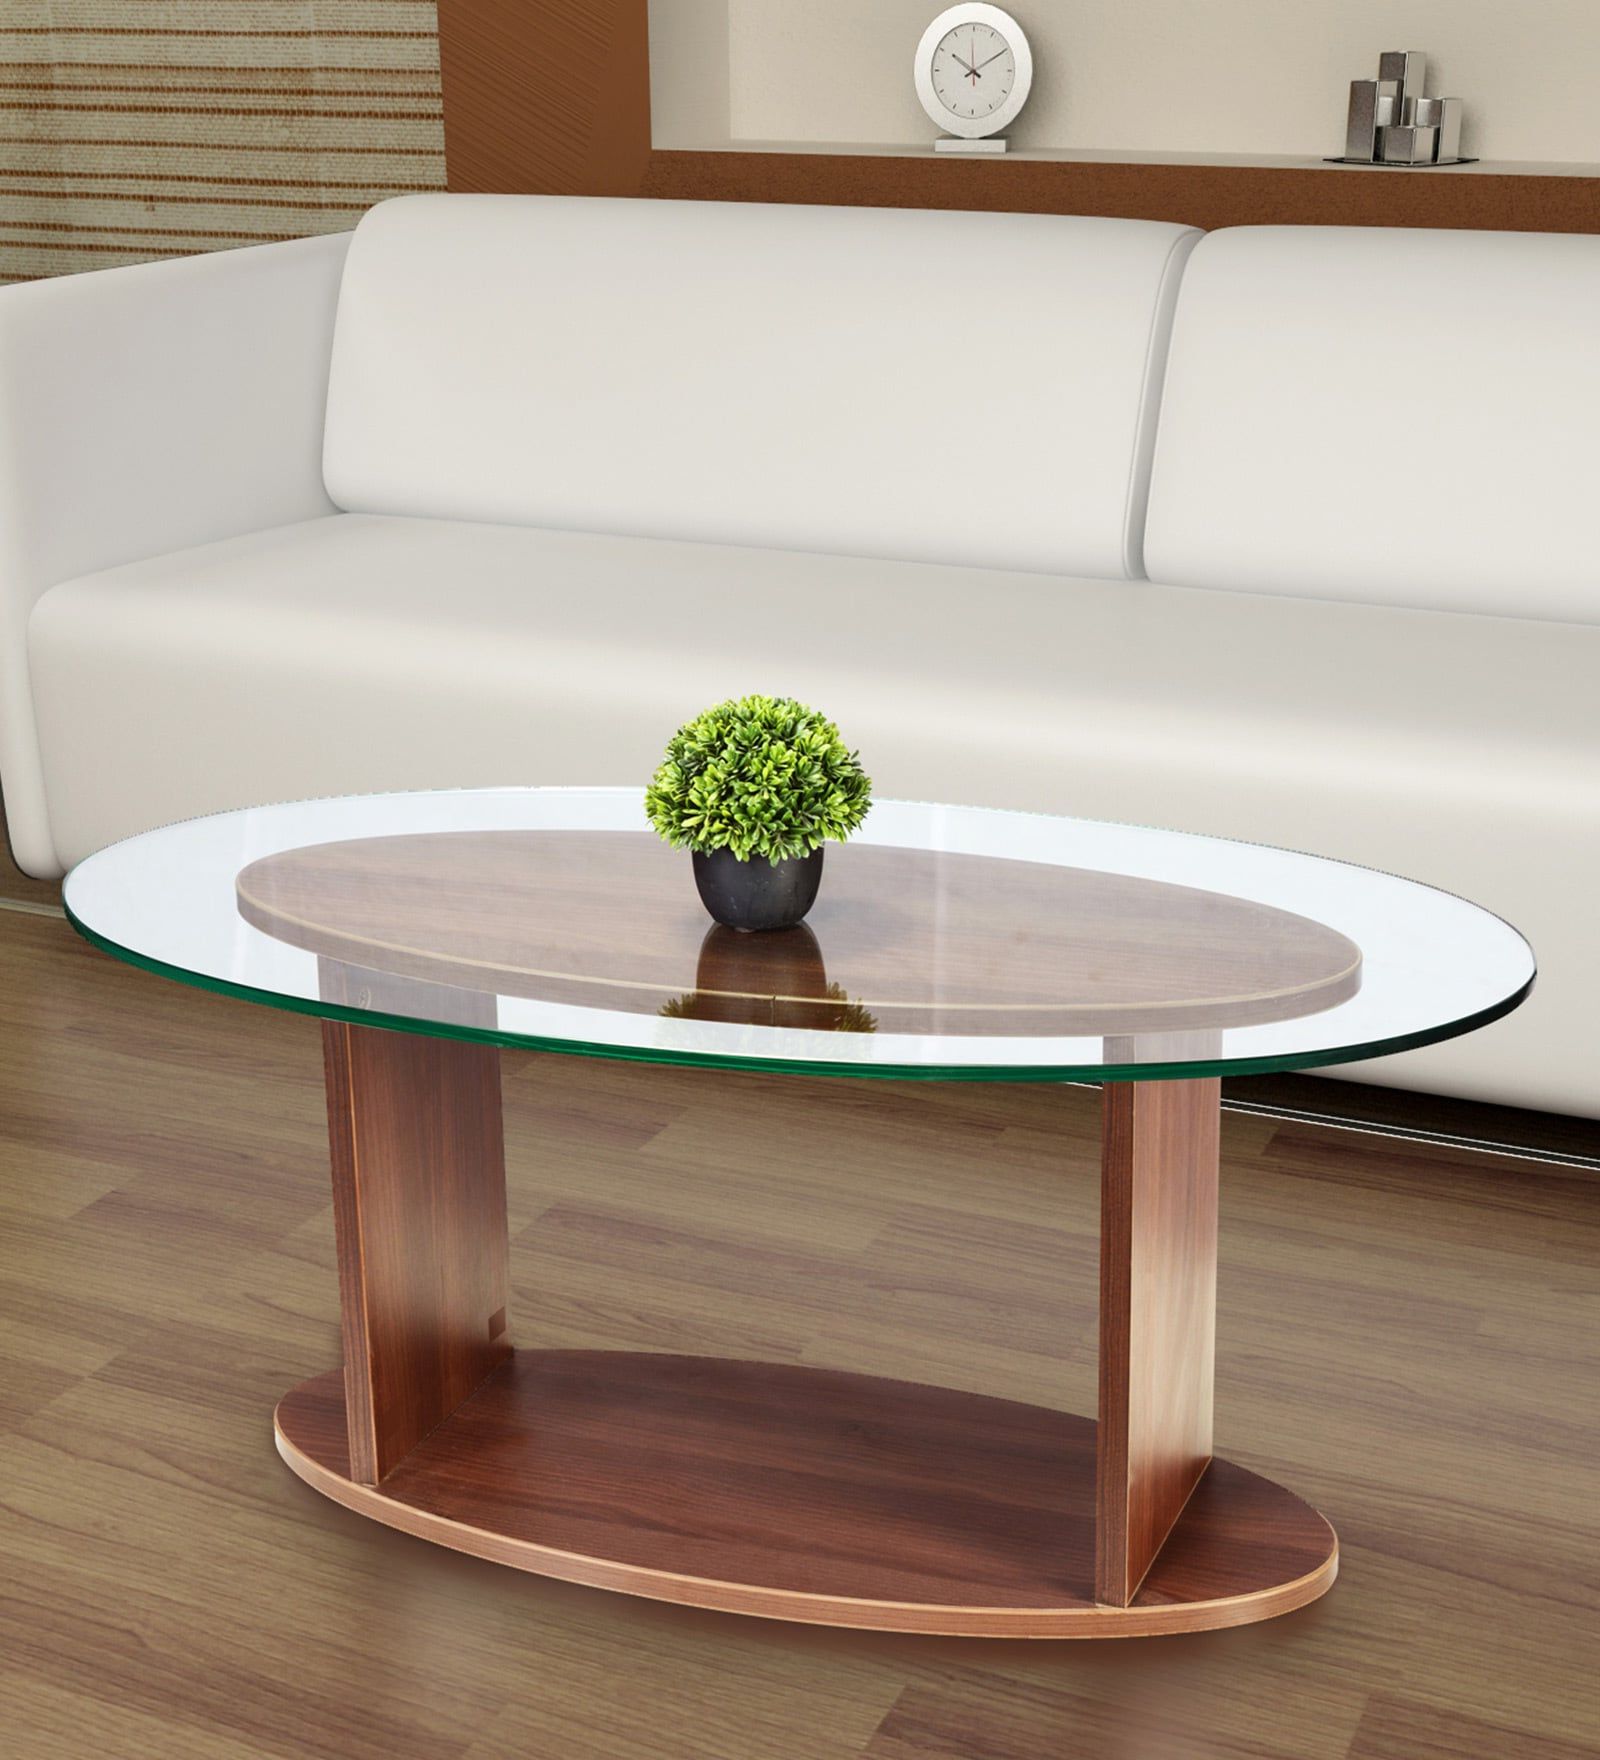 Buy Oval Shaped Glass Top Coffee Table In Walnut Finishaddy Design With Fashionable Oval Glass Coffee Tables (Photo 1 of 15)